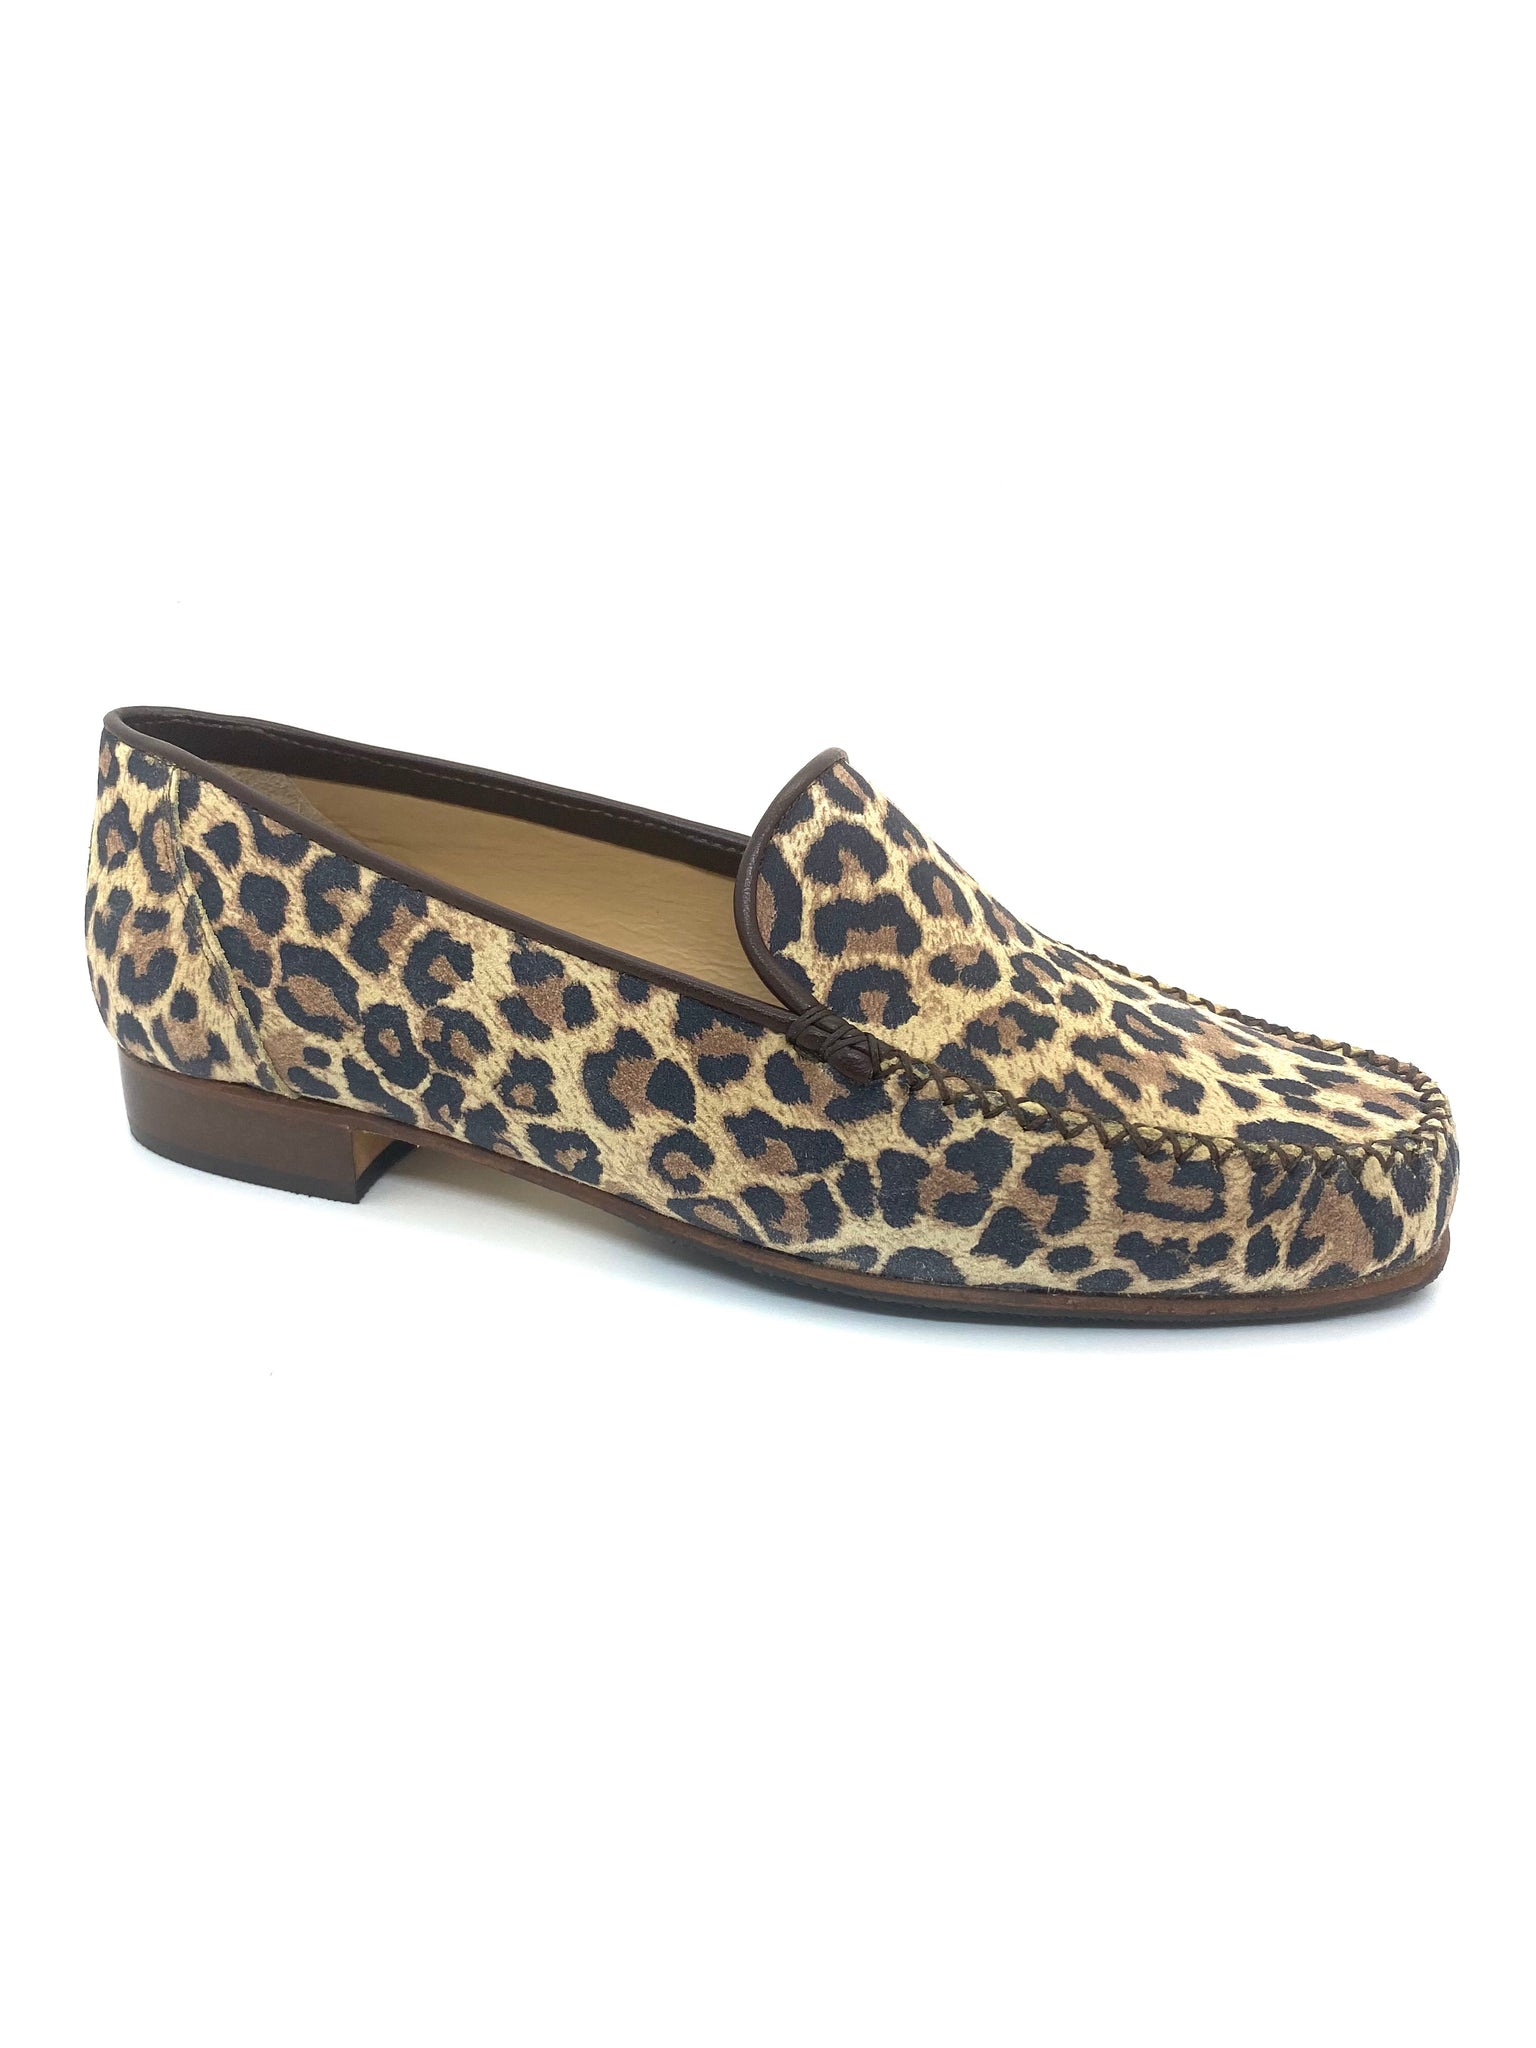 HB Ladies Classic Leopard Moccasin – Hobson Shoes